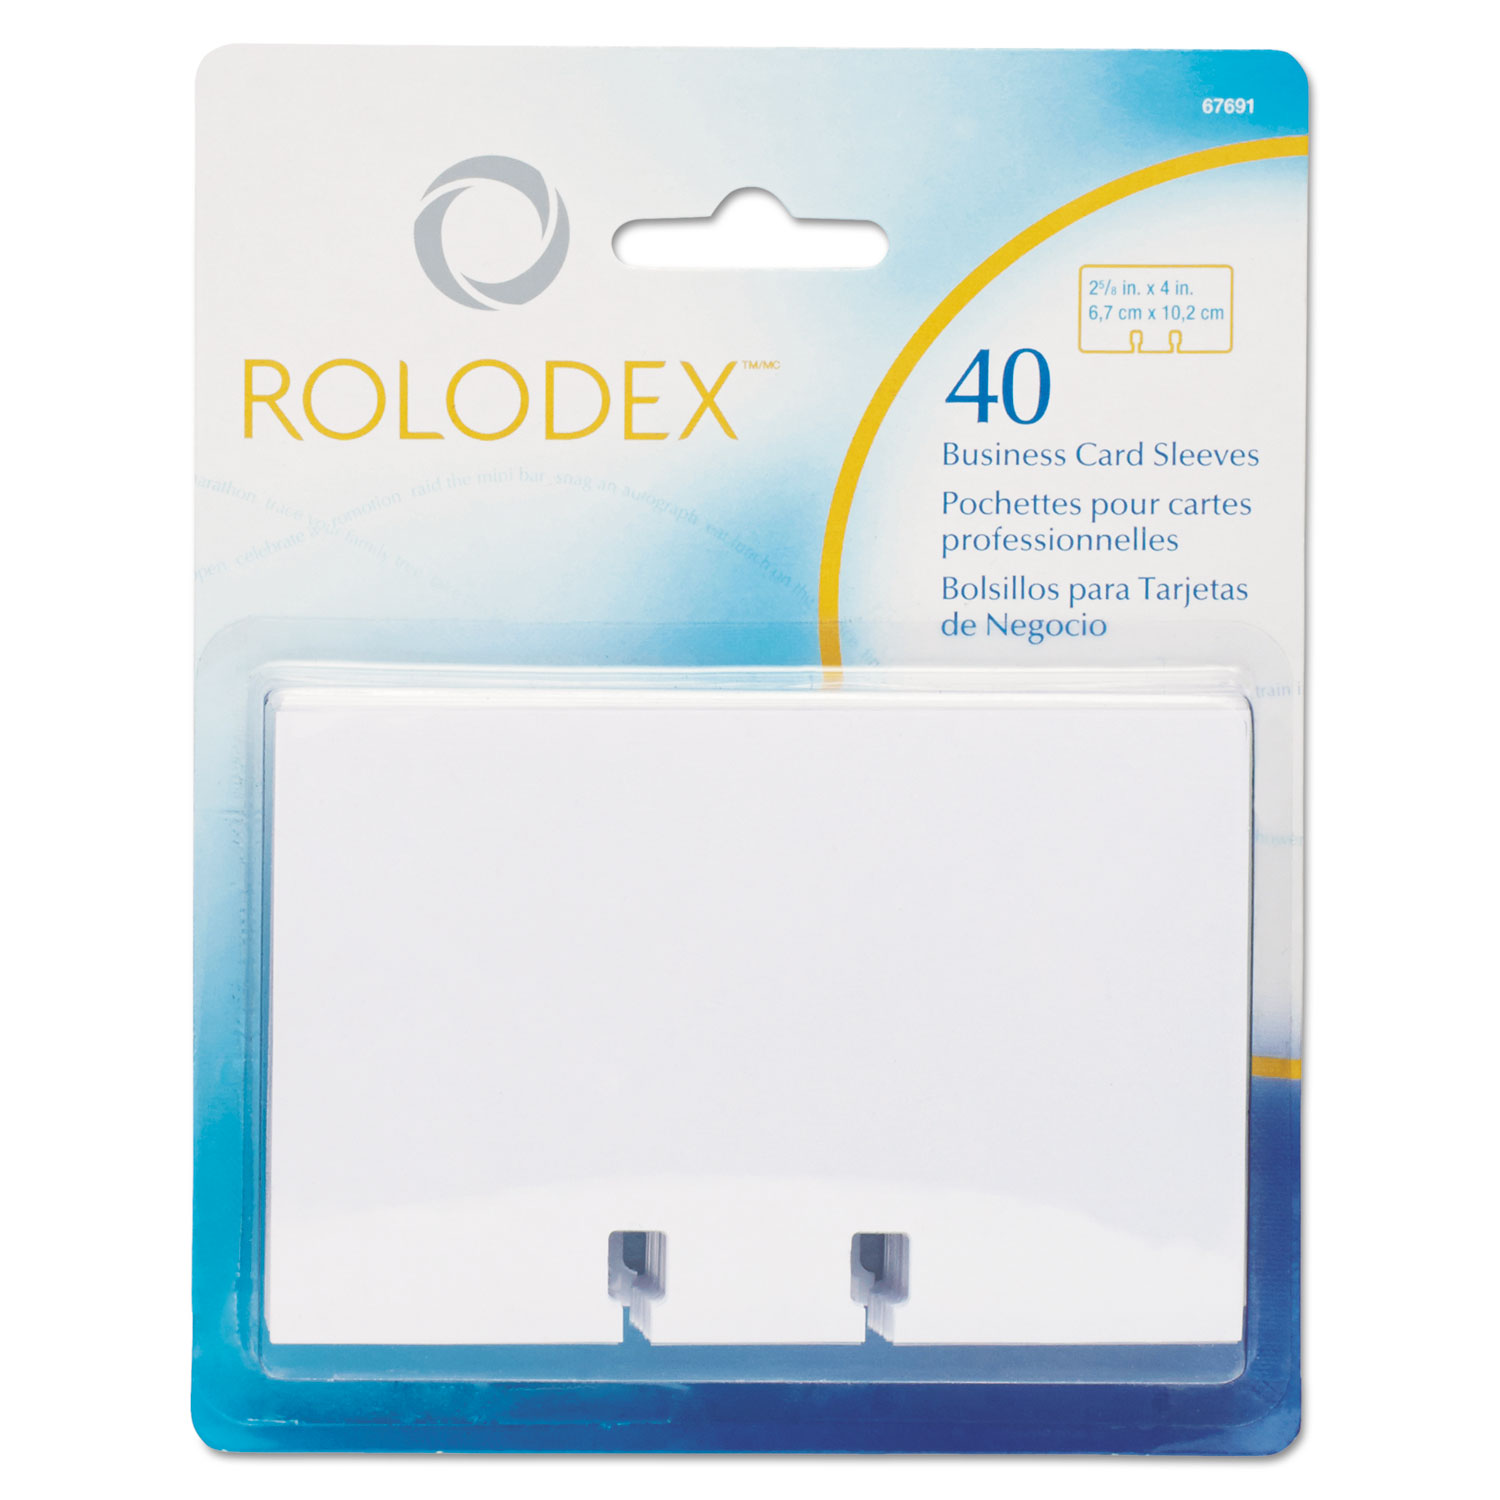 Rolodex™ Business Card Tray Refill Sleeves, 2 5/8 x 4, Clear, 40/Pack